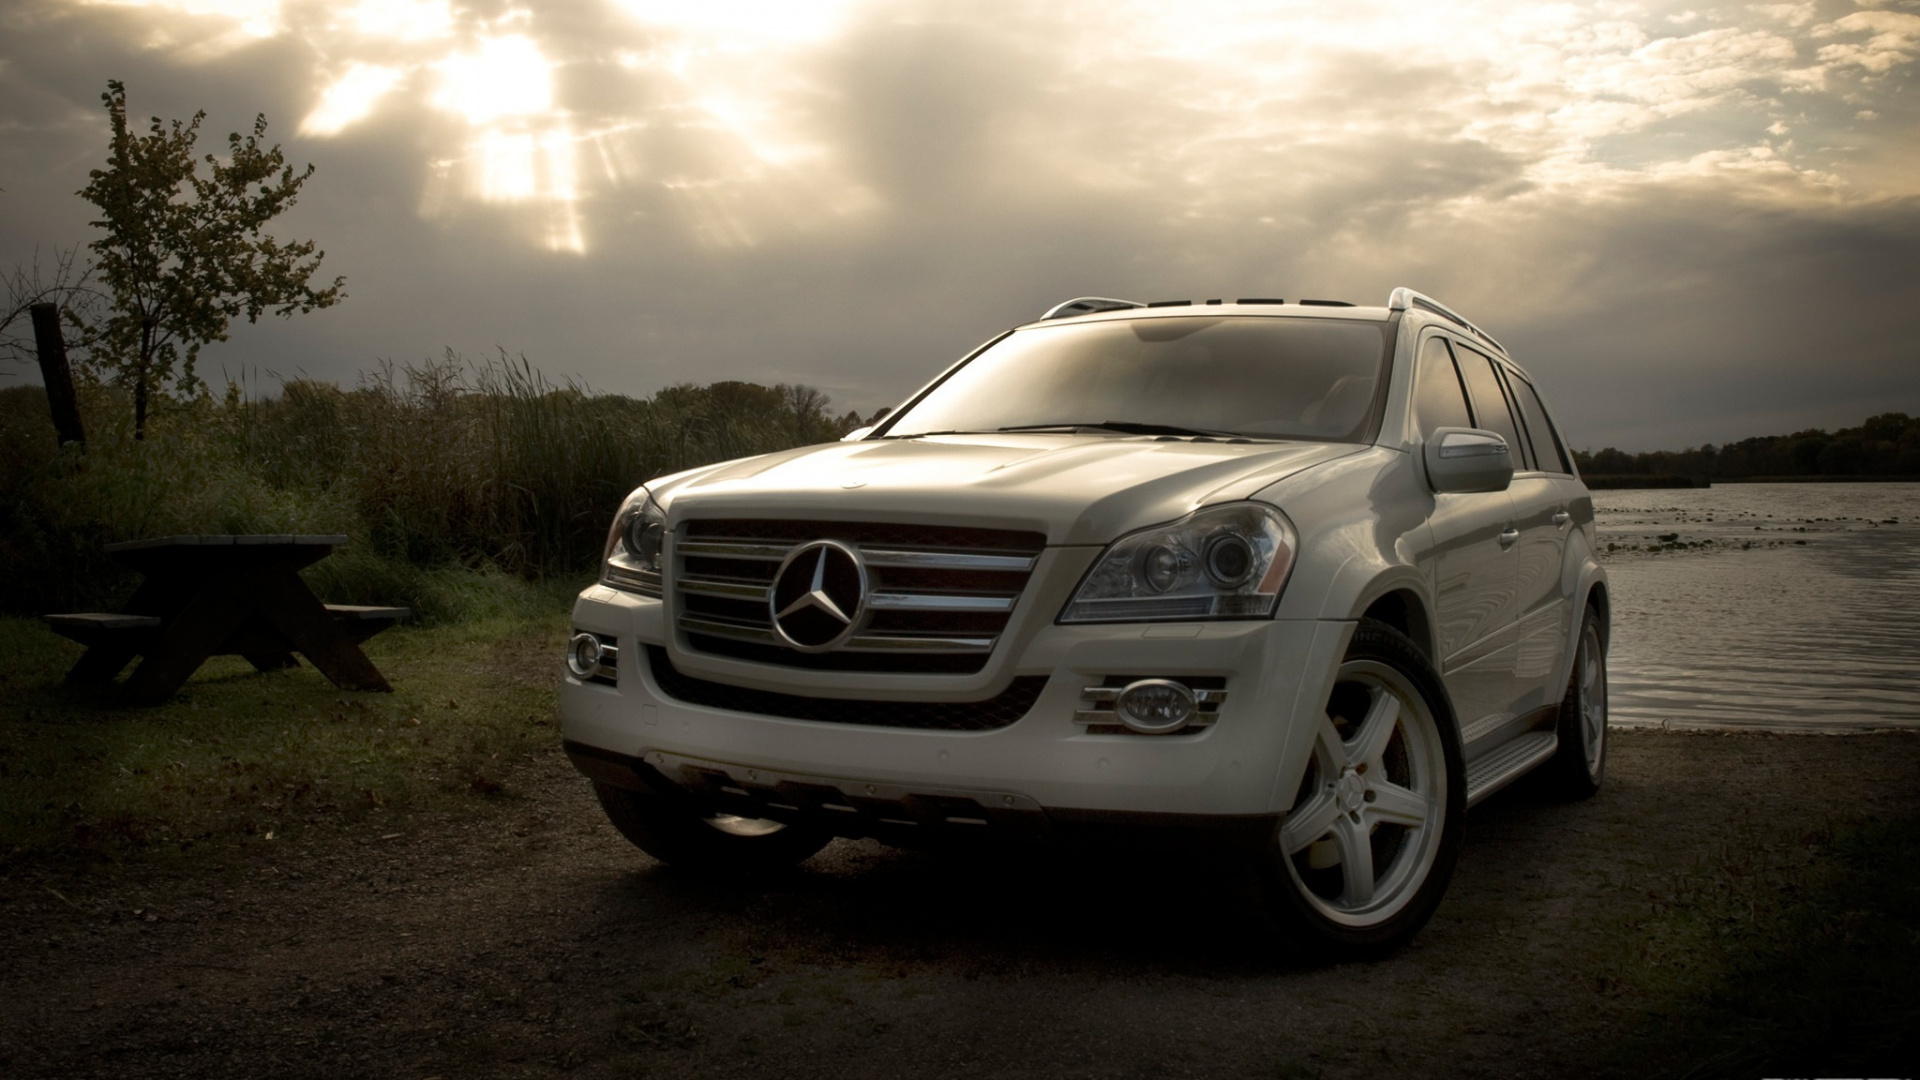 White Mercedes Benz Suv on Road During Daytime. Wallpaper in 1920x1080 Resolution